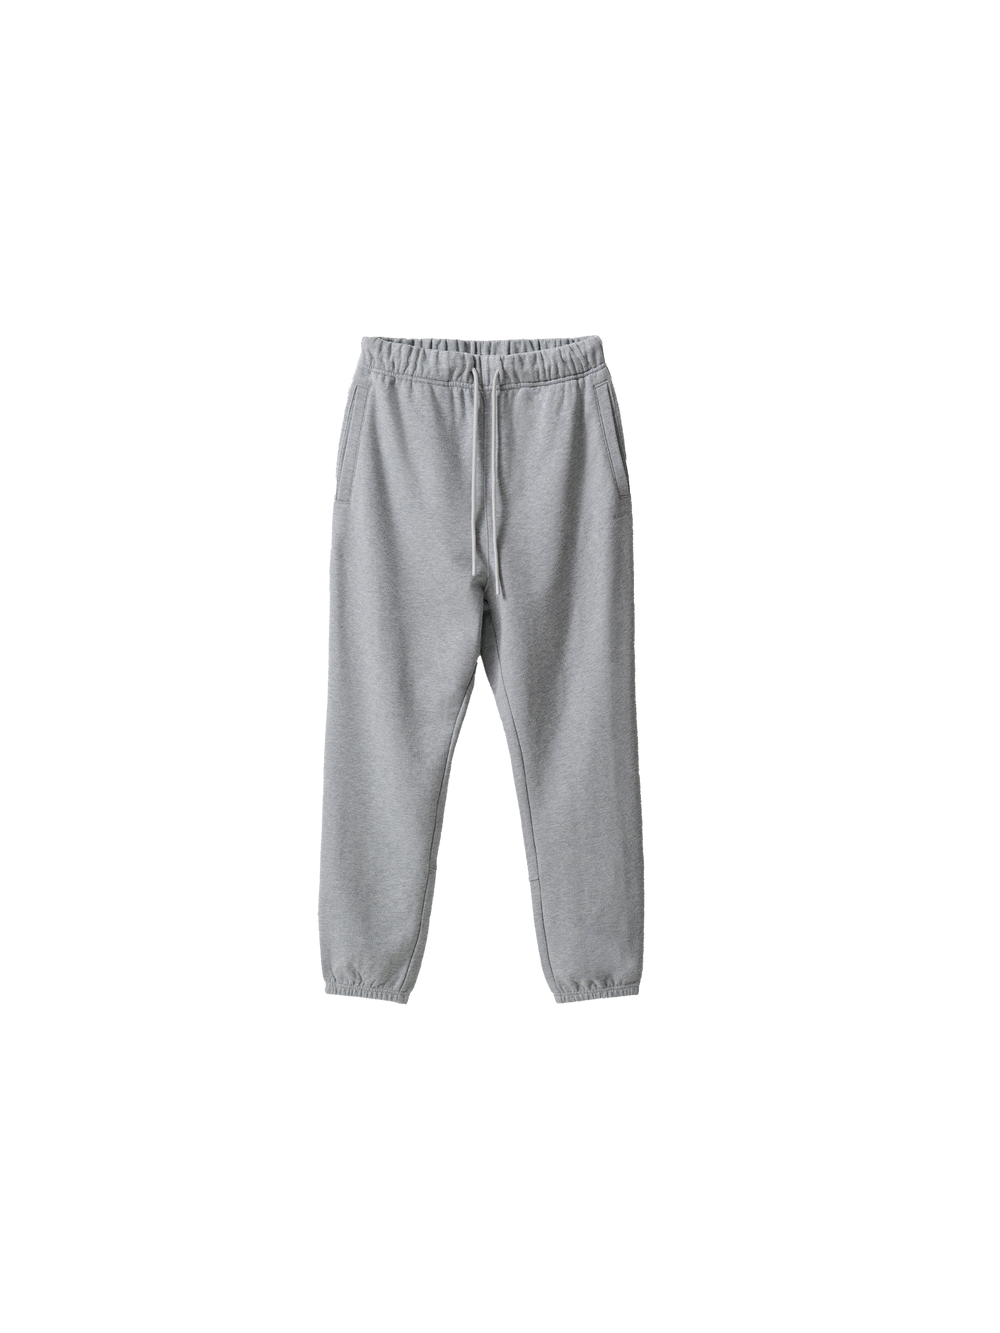 Product Image for Essentials Sweatpant